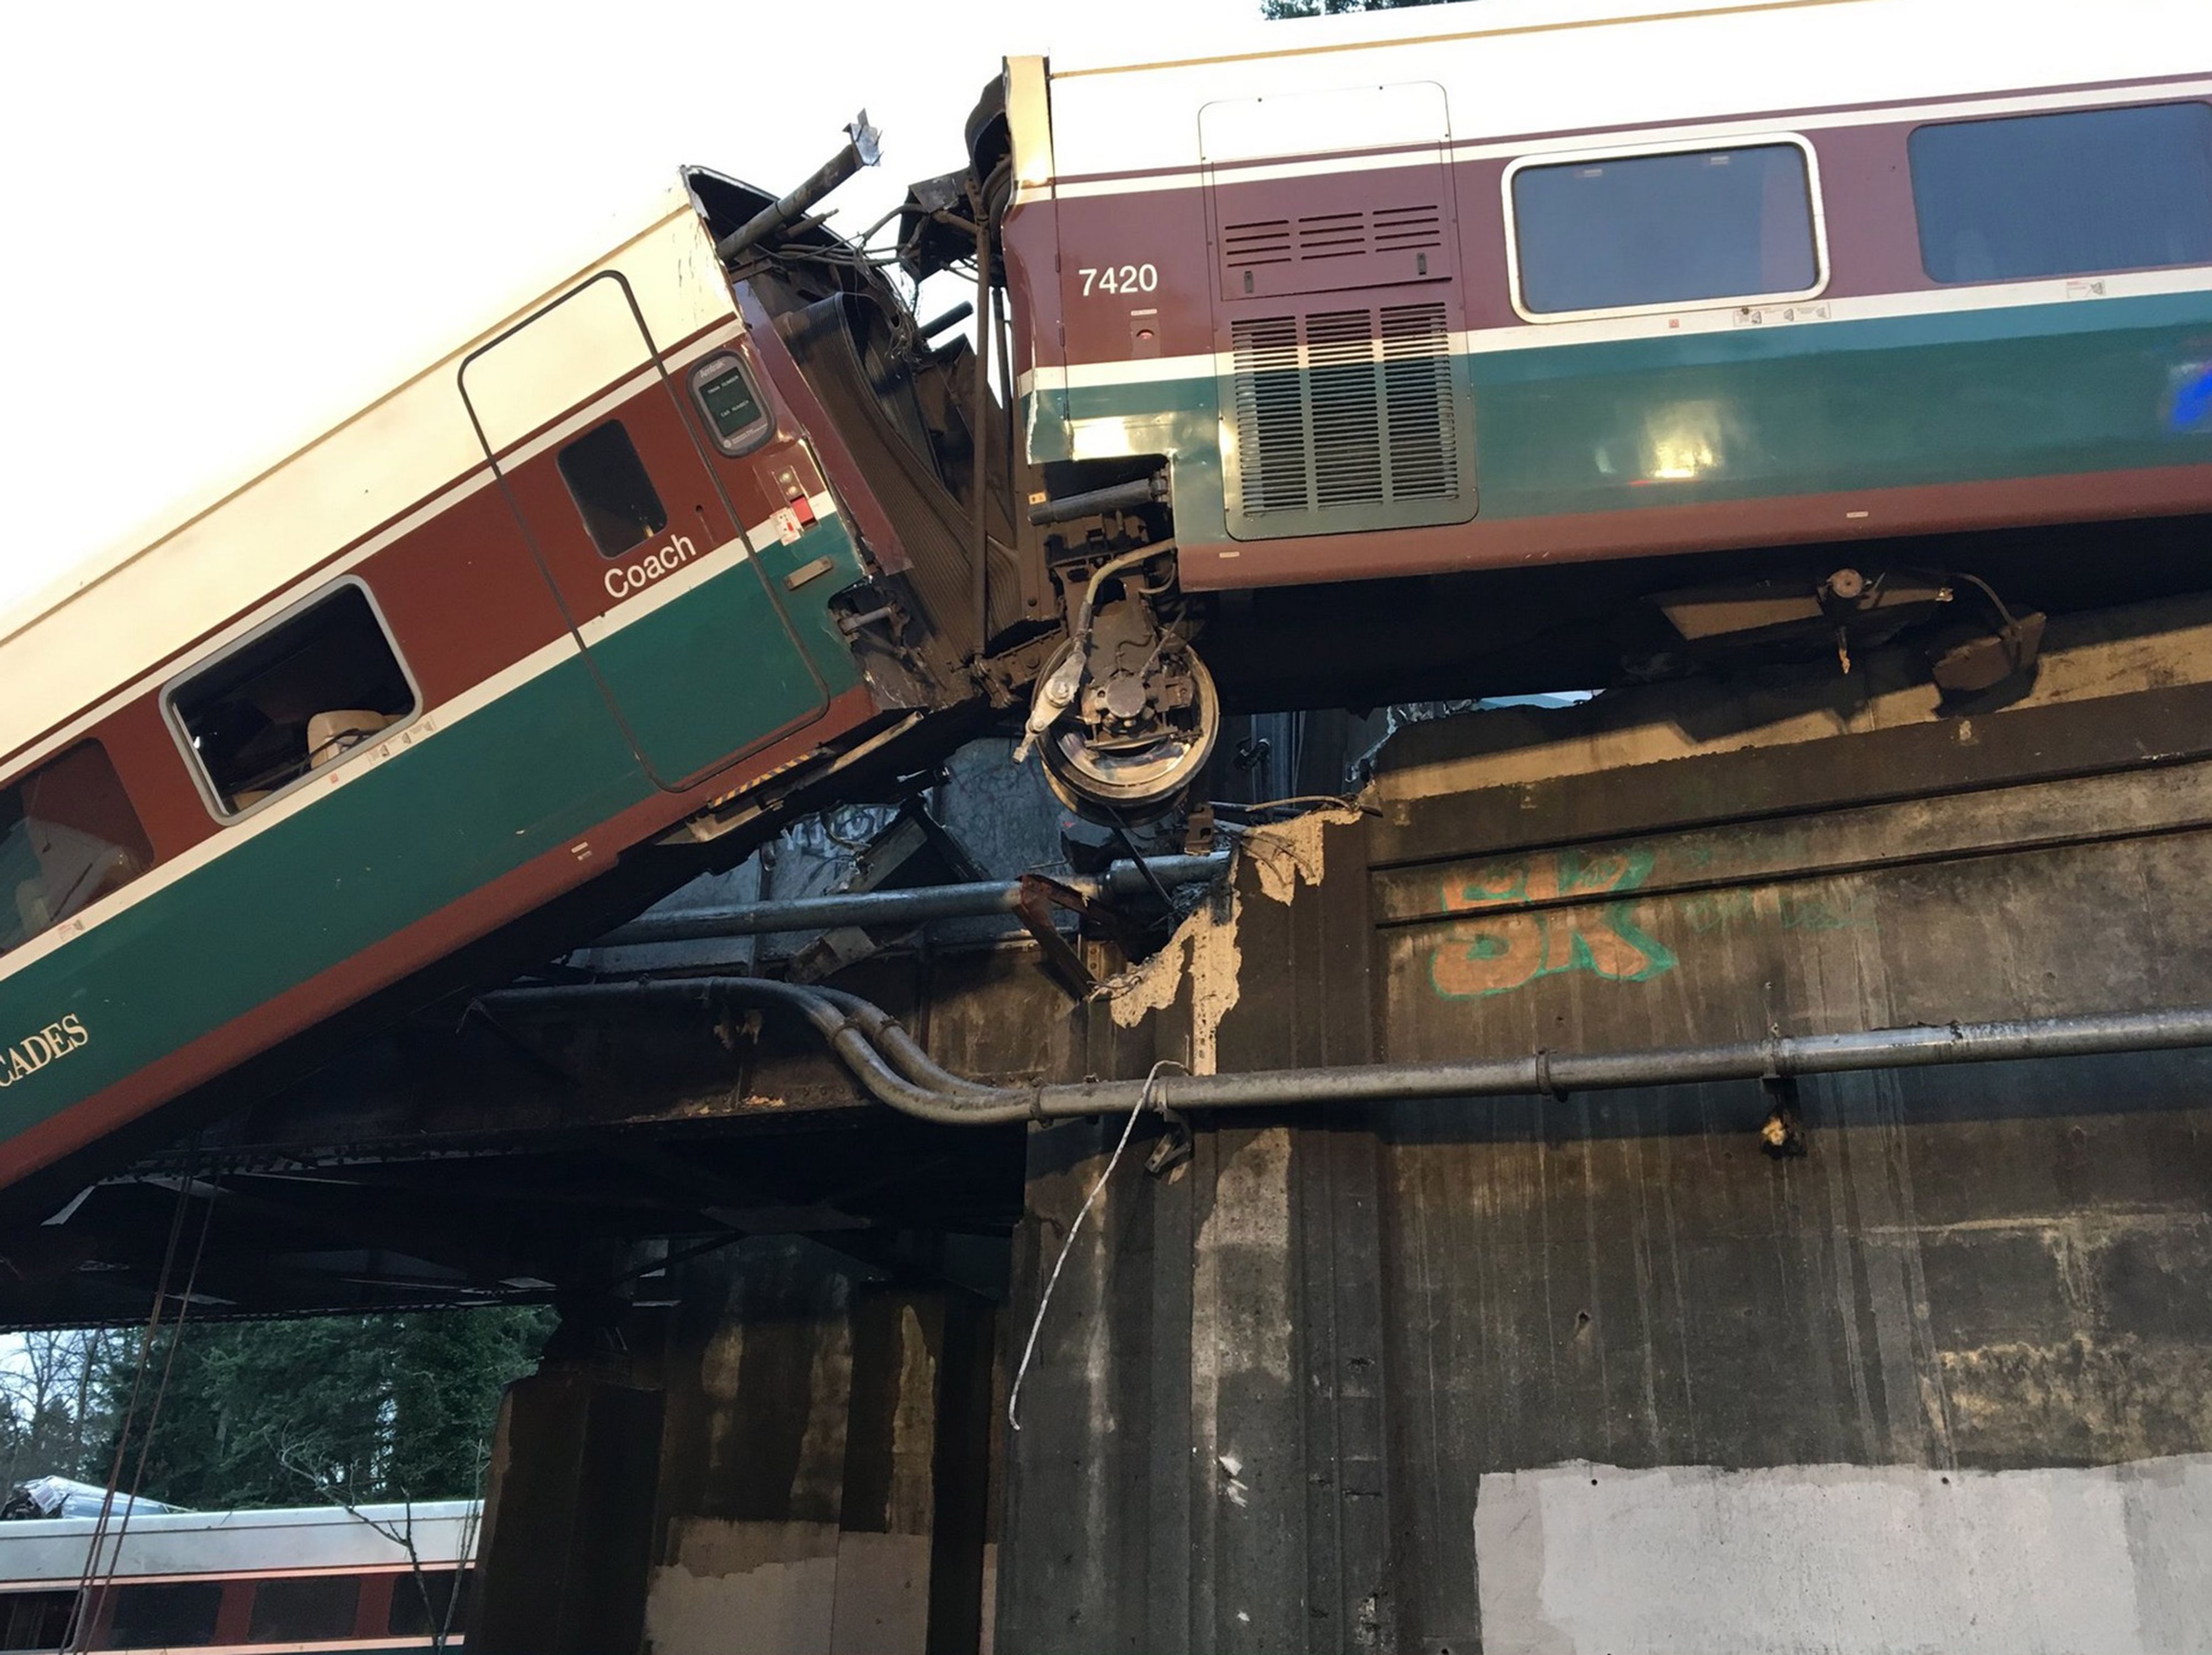 A handout photo made available by the Pierce County Sheriffs Department showing Amtrak train 501 which derailed onto Interstate 5 near Olympia, Washington — Shutterstock/AP (HANDOUT/EPA-EFE/REX/Shutterstock&mdash;HANDOUT/EPA-EFE/REX/Shutterstock)